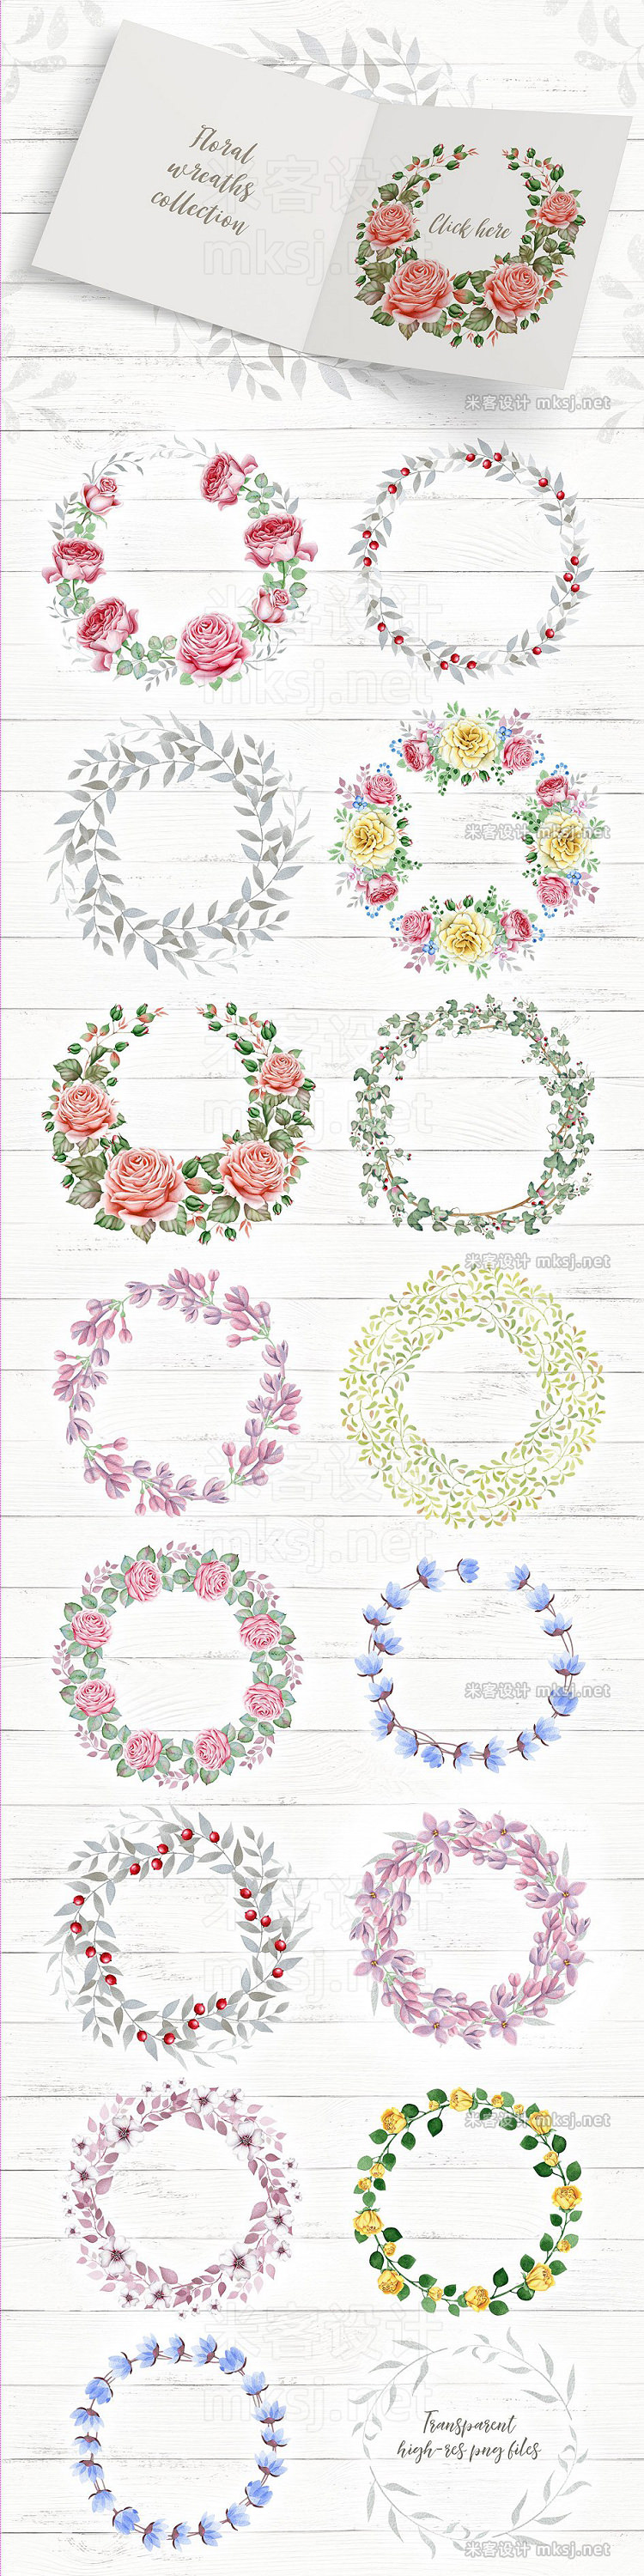 png素材 Wreaths and Bouquets collection V3